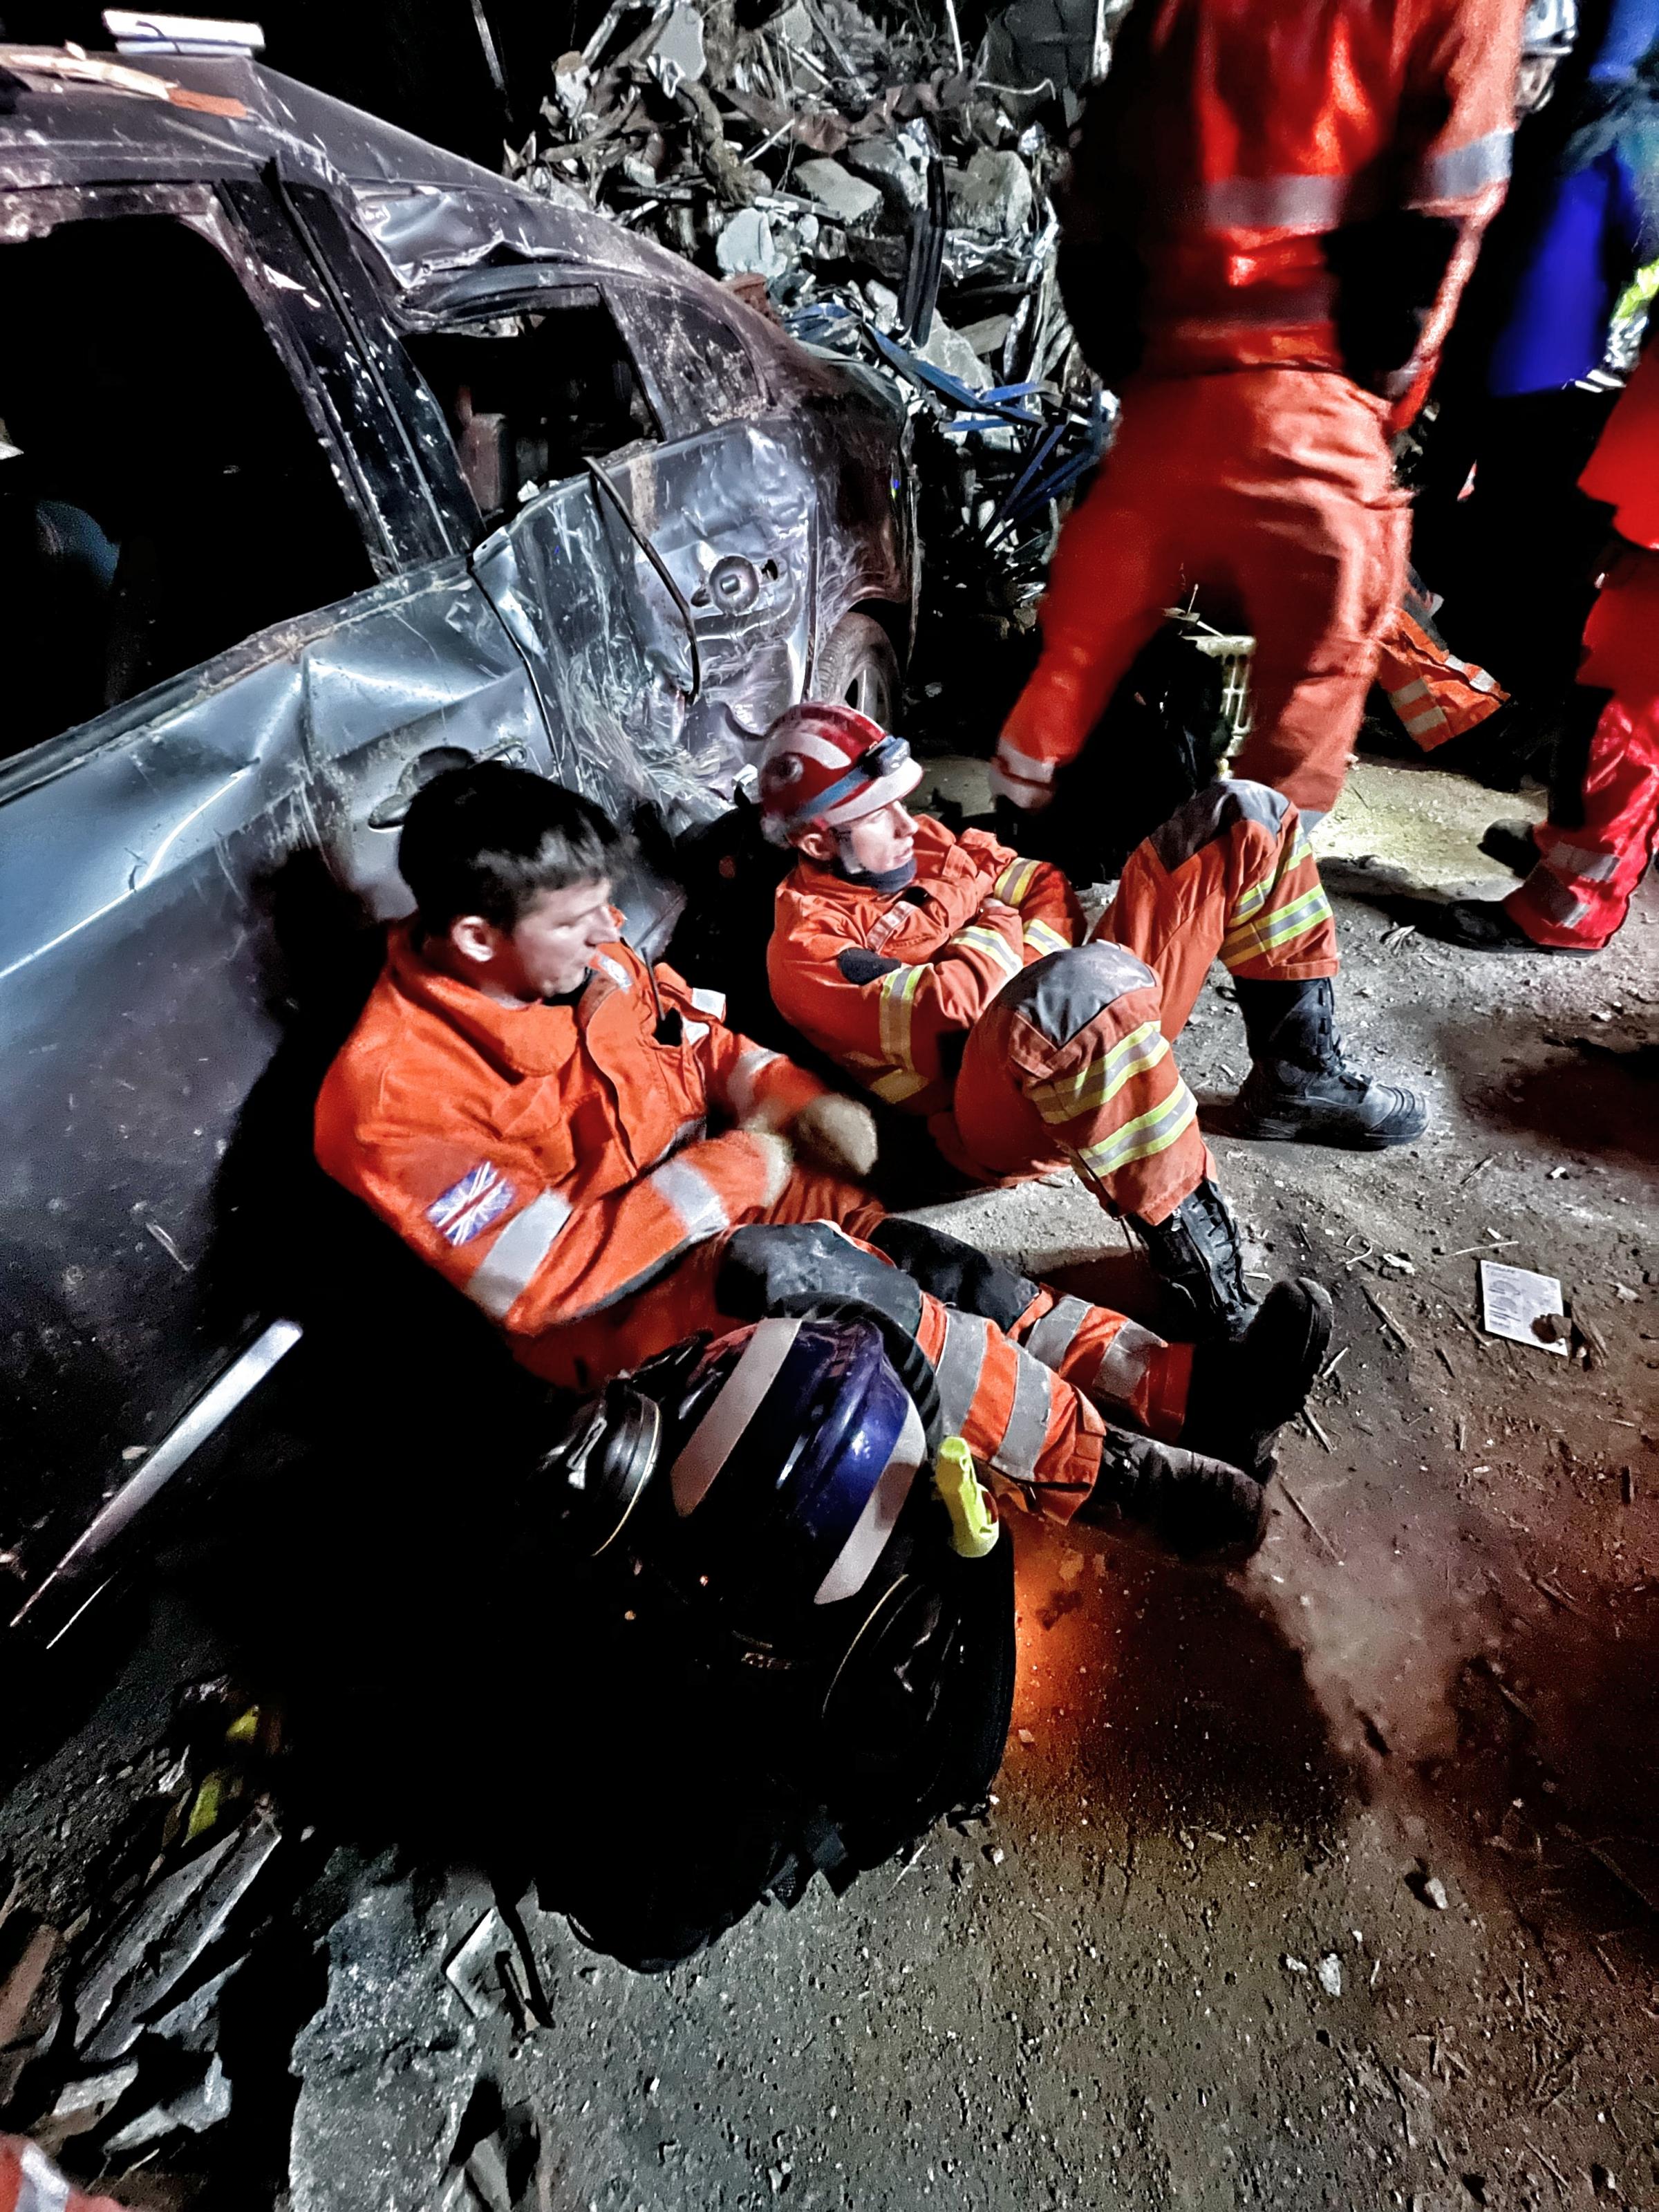 Malcolm Russell has told of the challenges that faced rescuers in Turkey